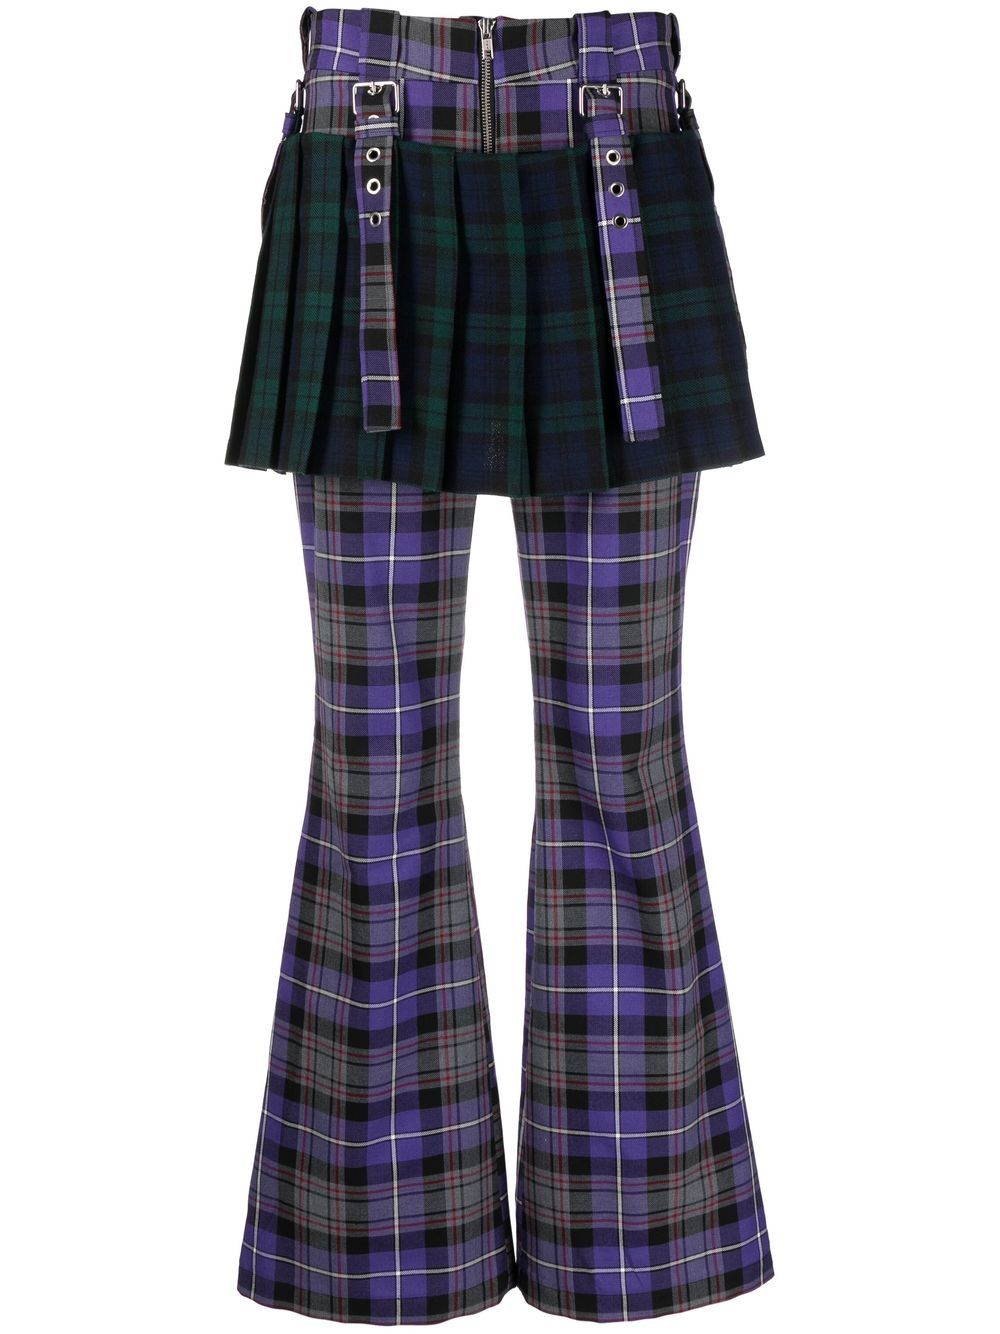 Rave Review tartan-print Skirt Overlay Flared Trousers - Farfetch